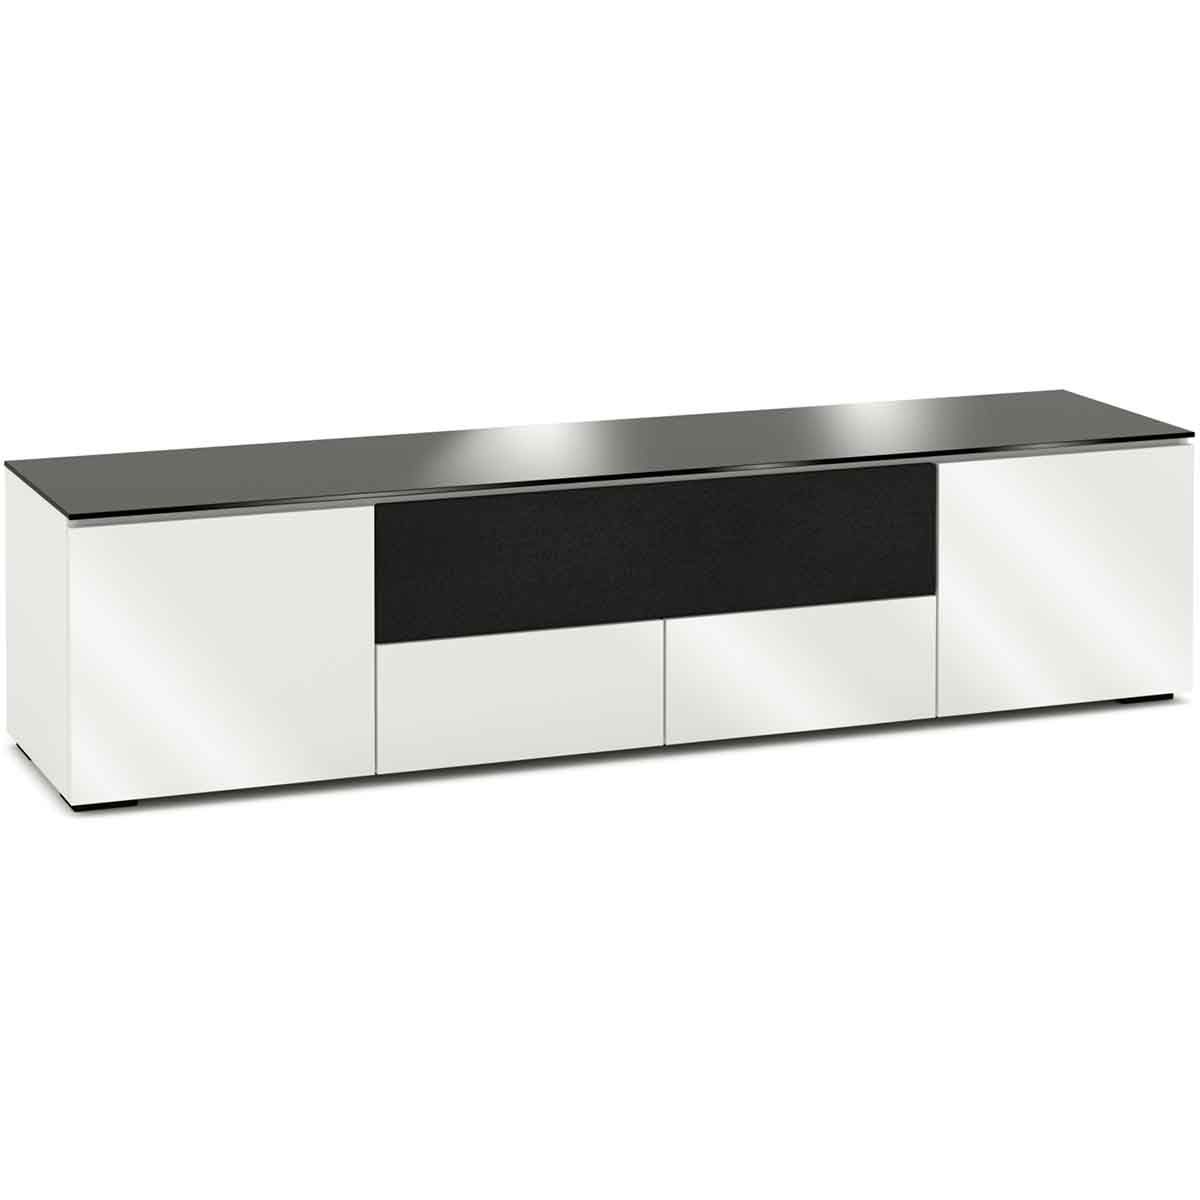 Salamander Designs Miami 245 Quad-Width AV Cabinet with Center Speaker Opening- Gloss White / Black Glass- front view